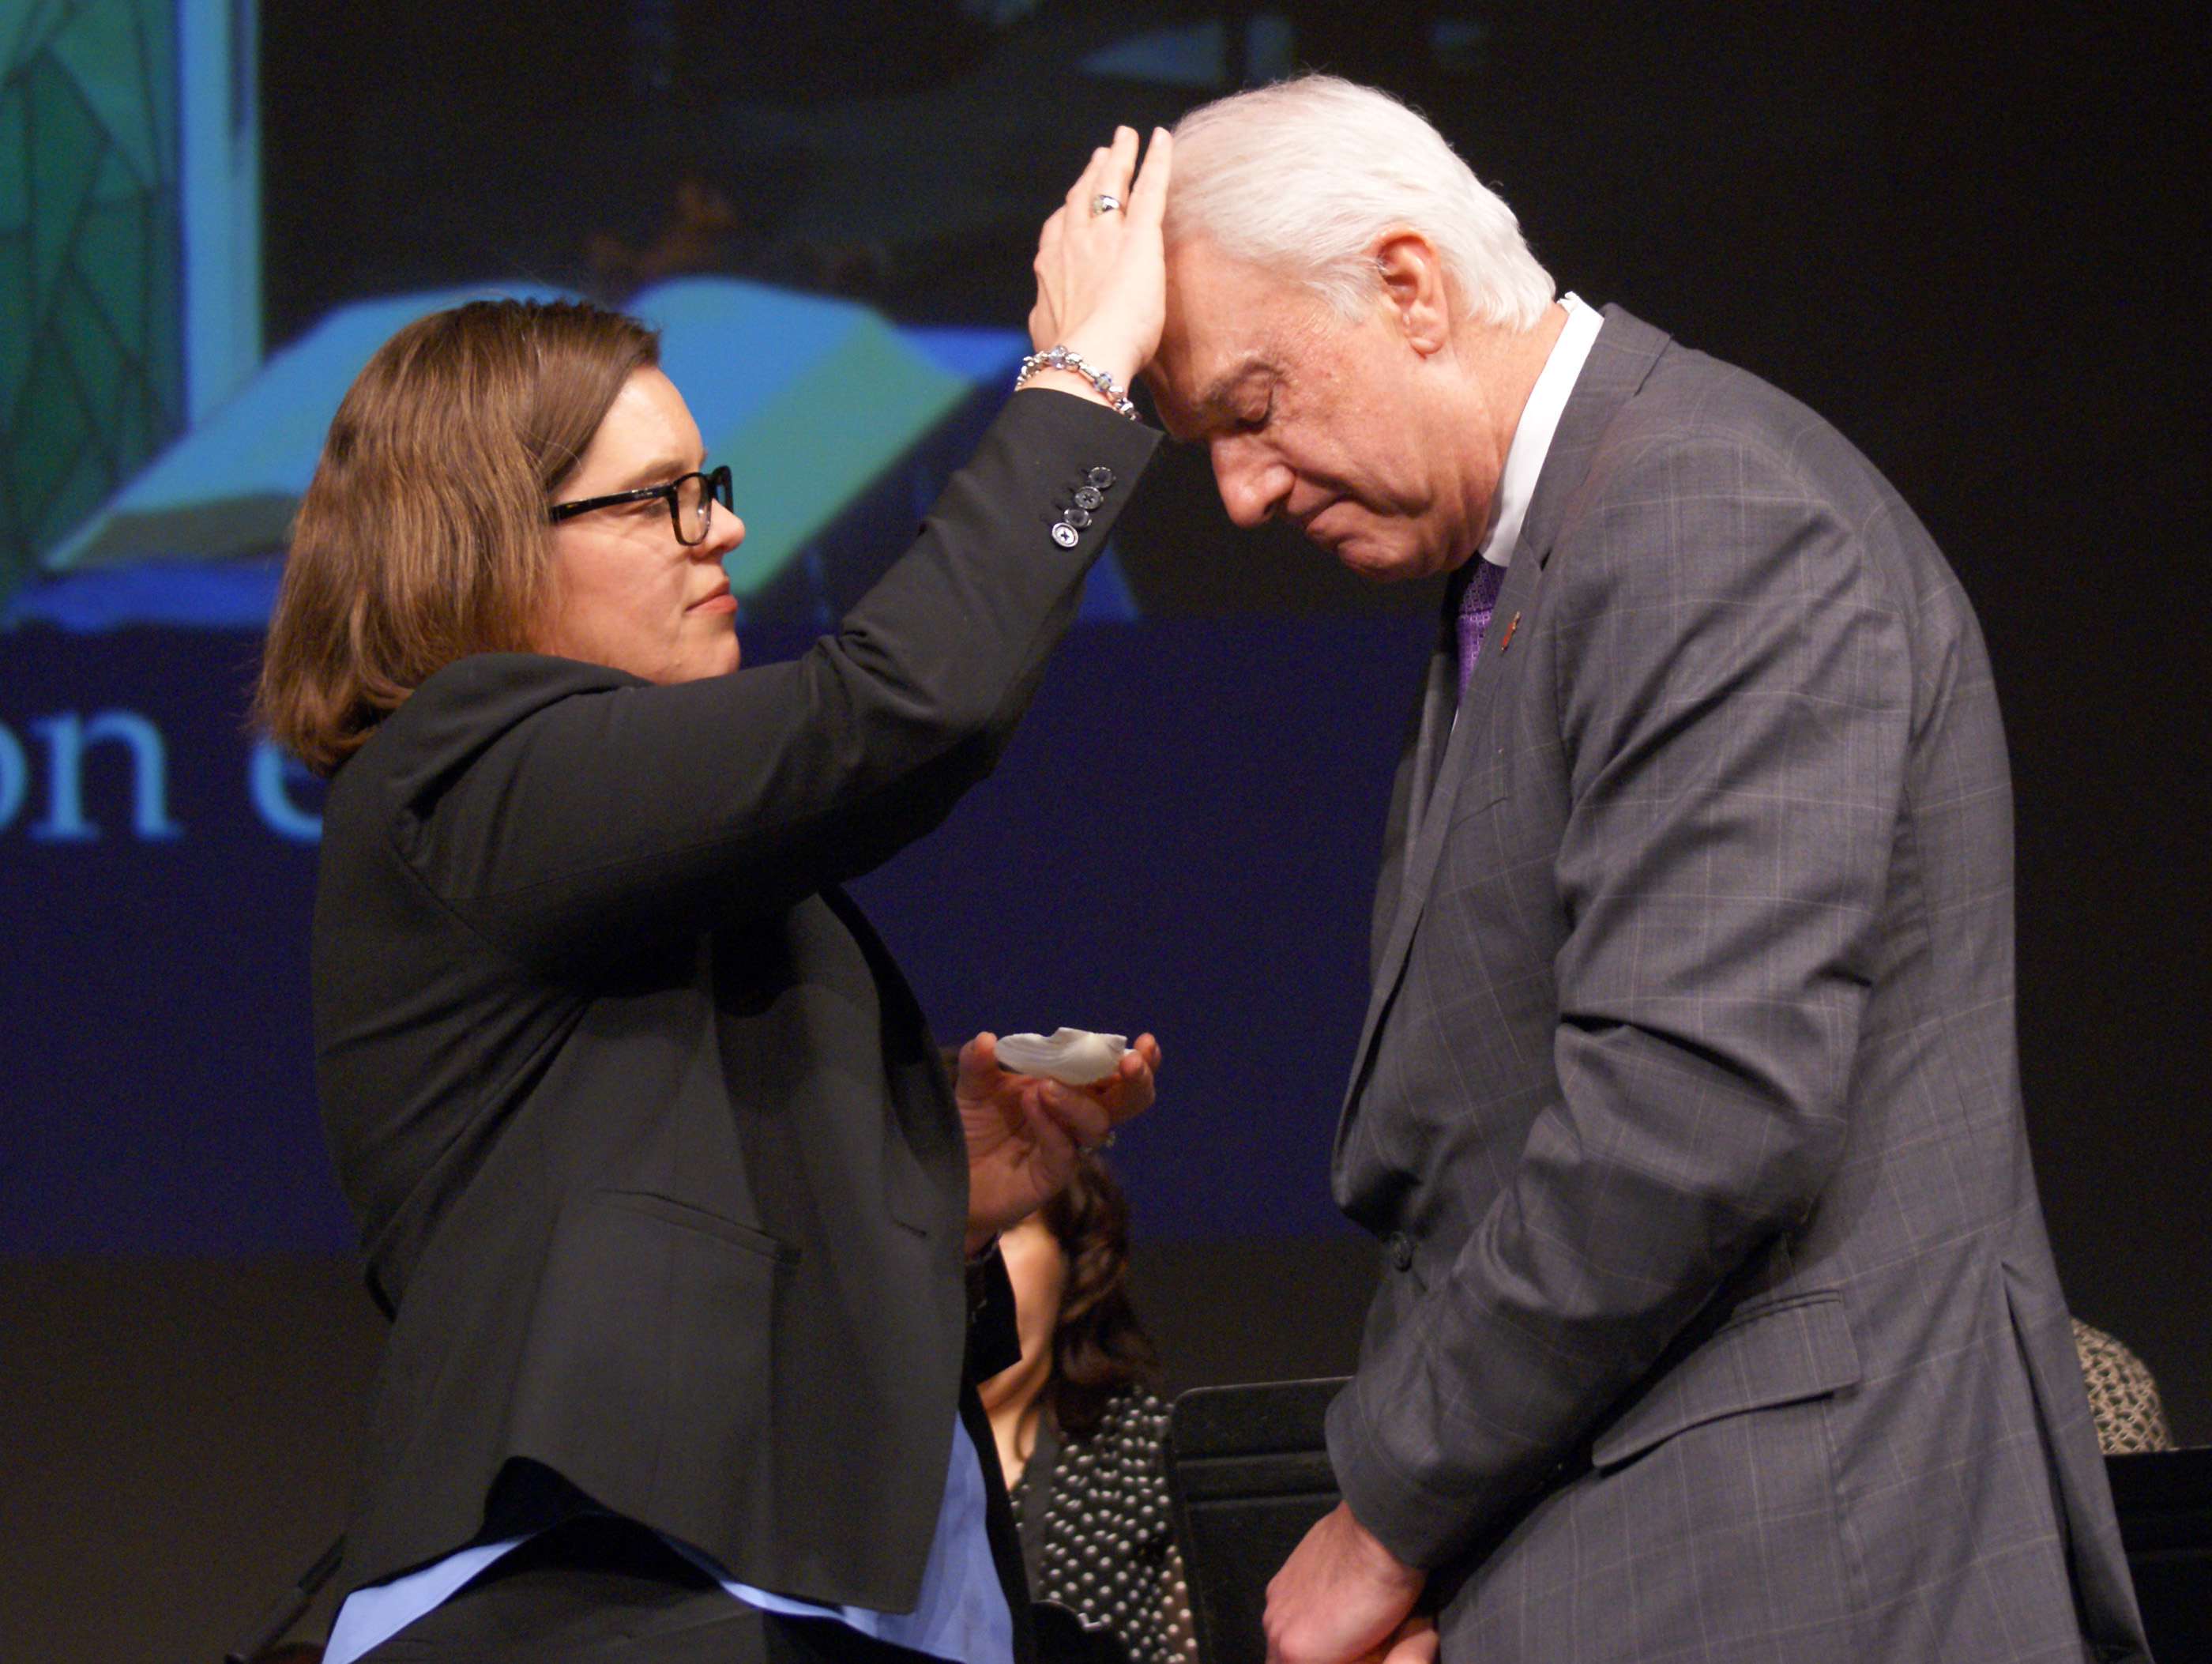 The Rev. Heather Sinclair anoints Bishop Thomas J. Bickerton at the beginning of a time of healing prayer and anointing at the close of a special session of the New York Annual Conference at Purchase College, State University of New York. Photo by Stephanie Parsons.